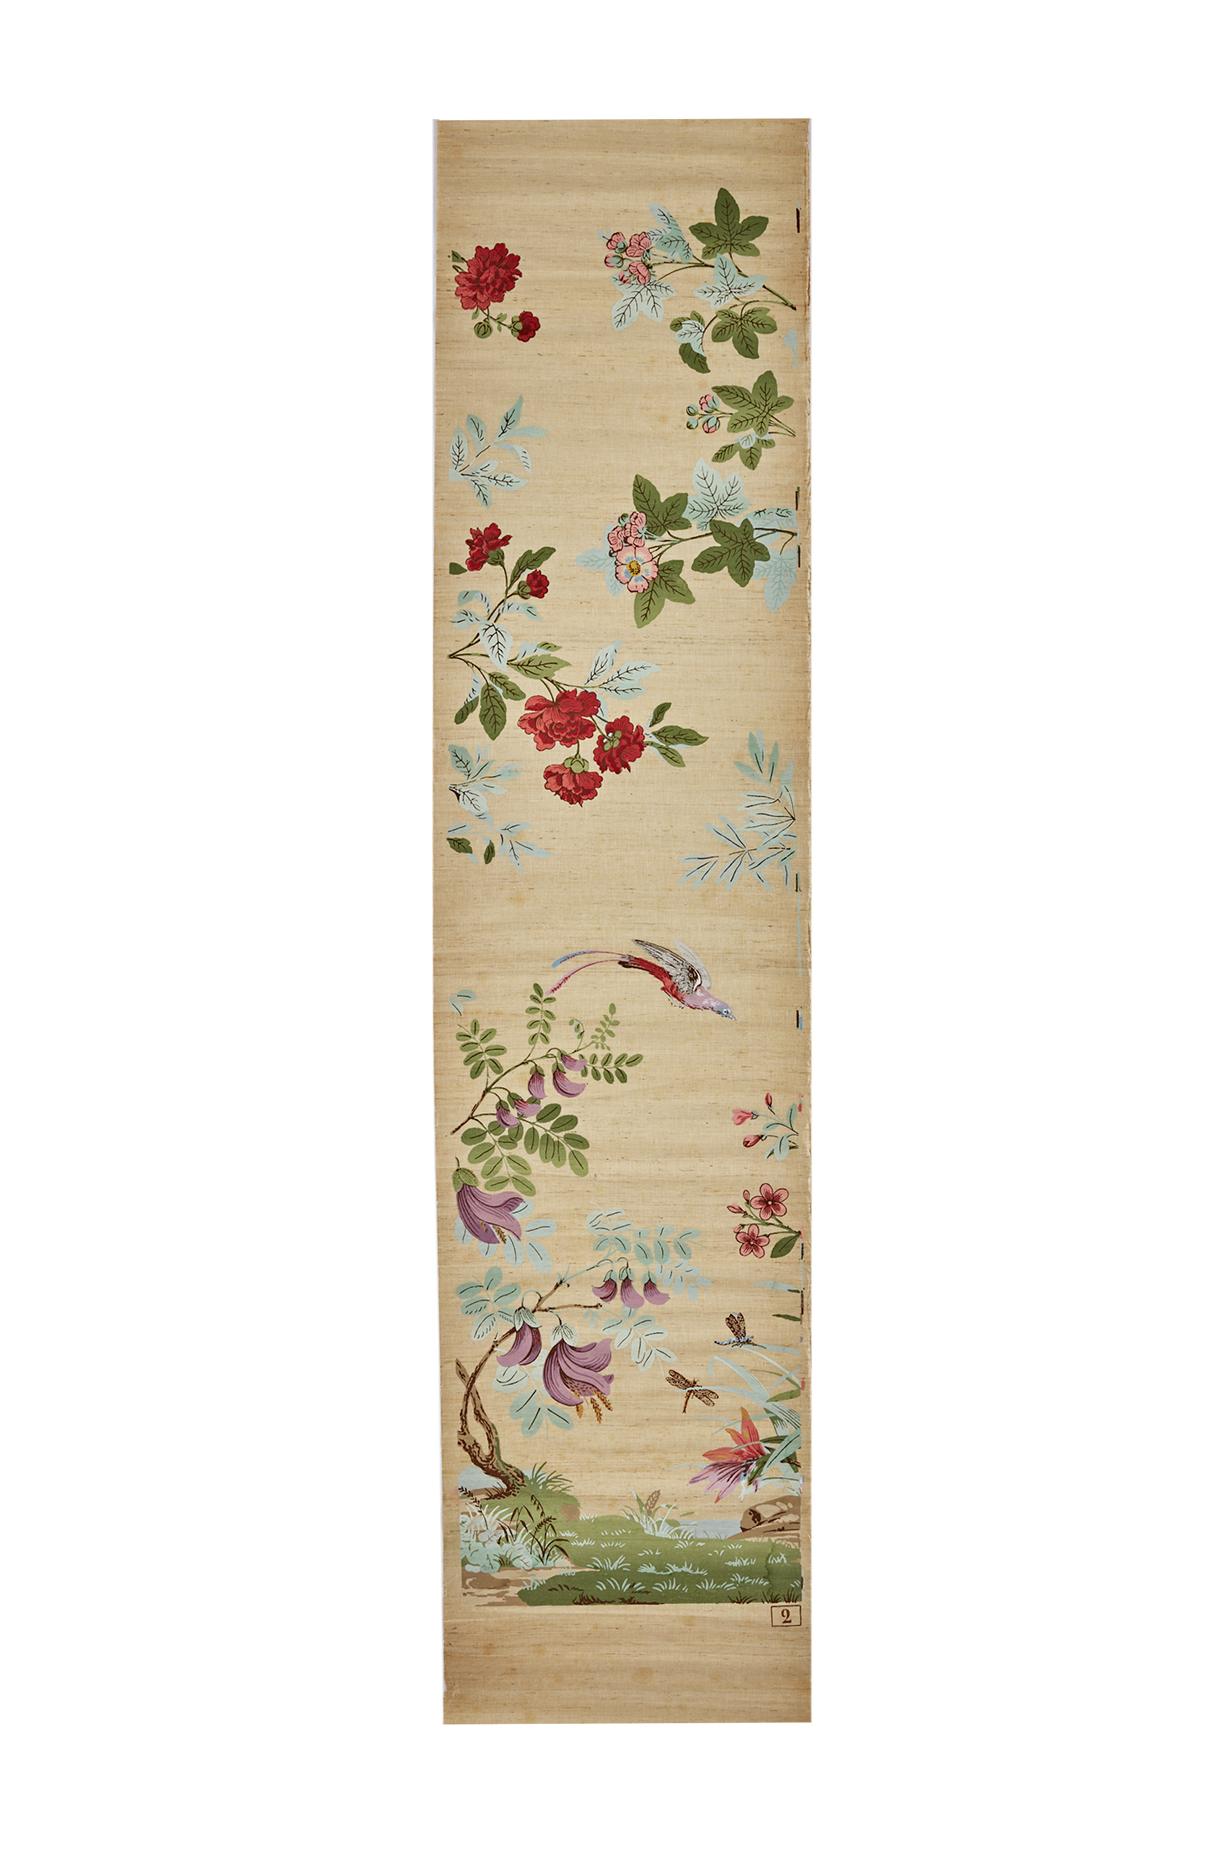 20th Century Zuber, 'Decor Chinois' Hand Wood Blocked on Grasscloth Scenic Wall Paper For Sale